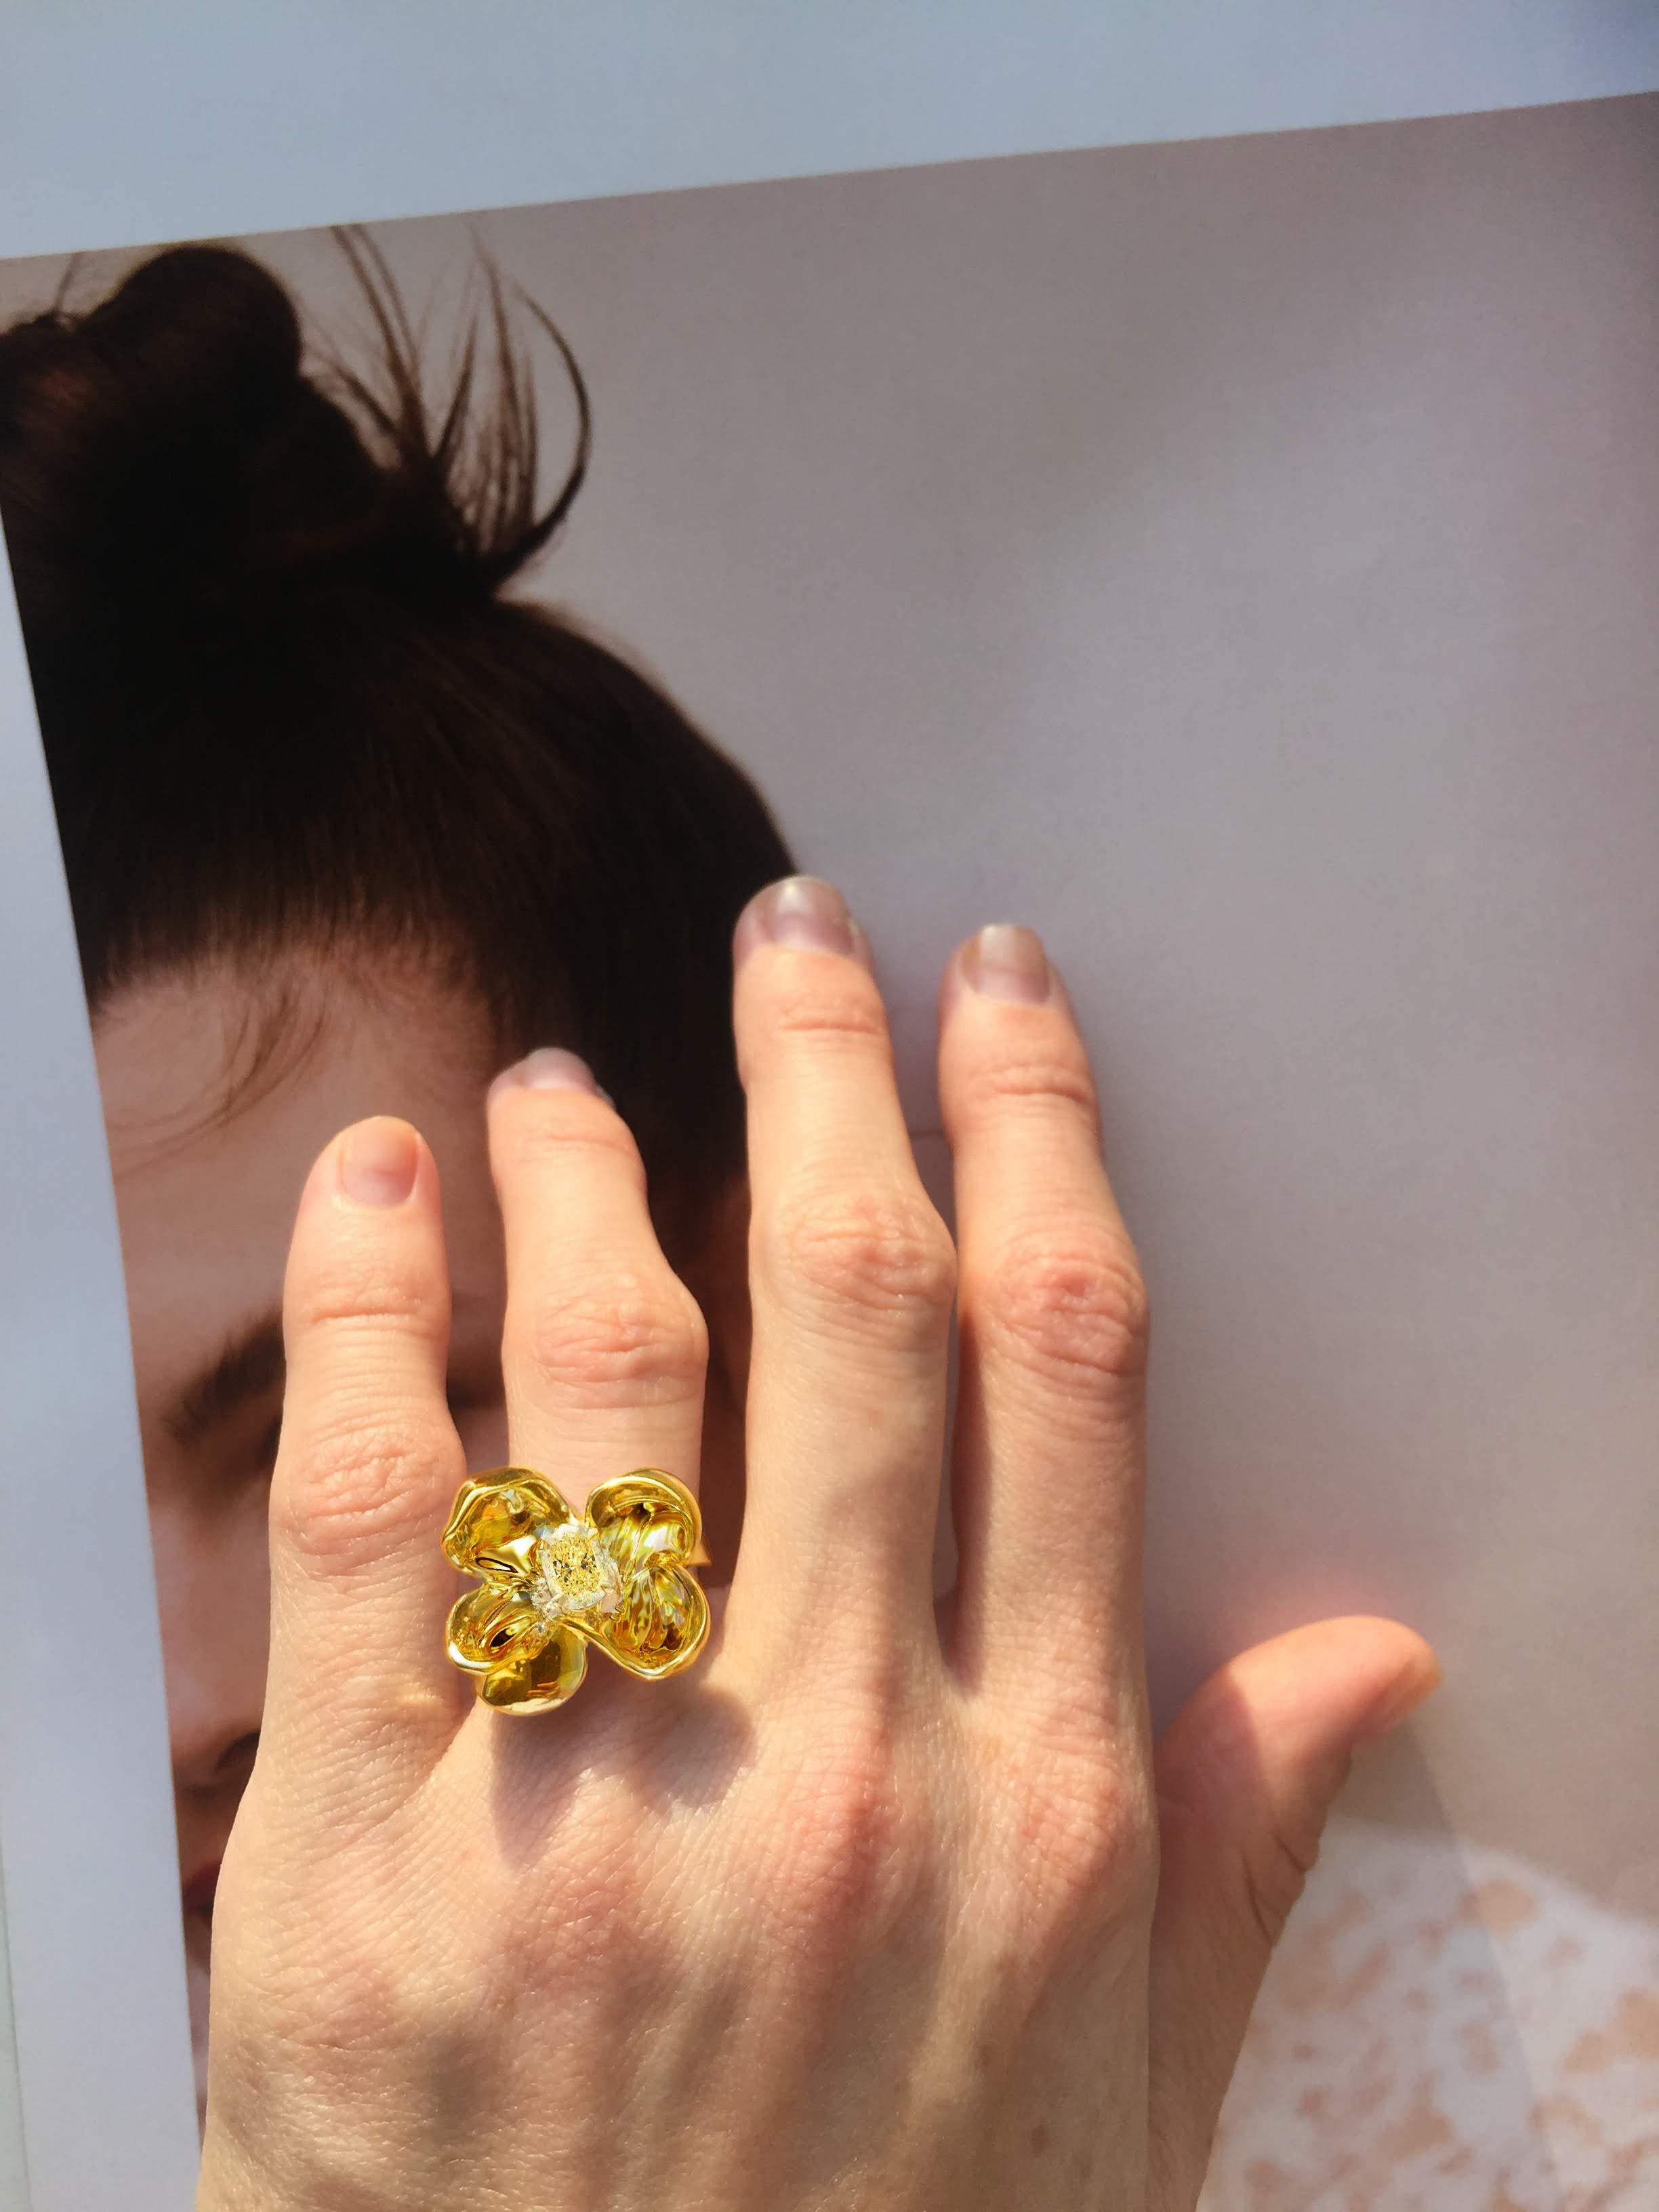 This Magnolia Flower engagement or cocktail ring is made of 18 karat yellow gold and features a yellow diamond with great characteristics. The cushion cut with 